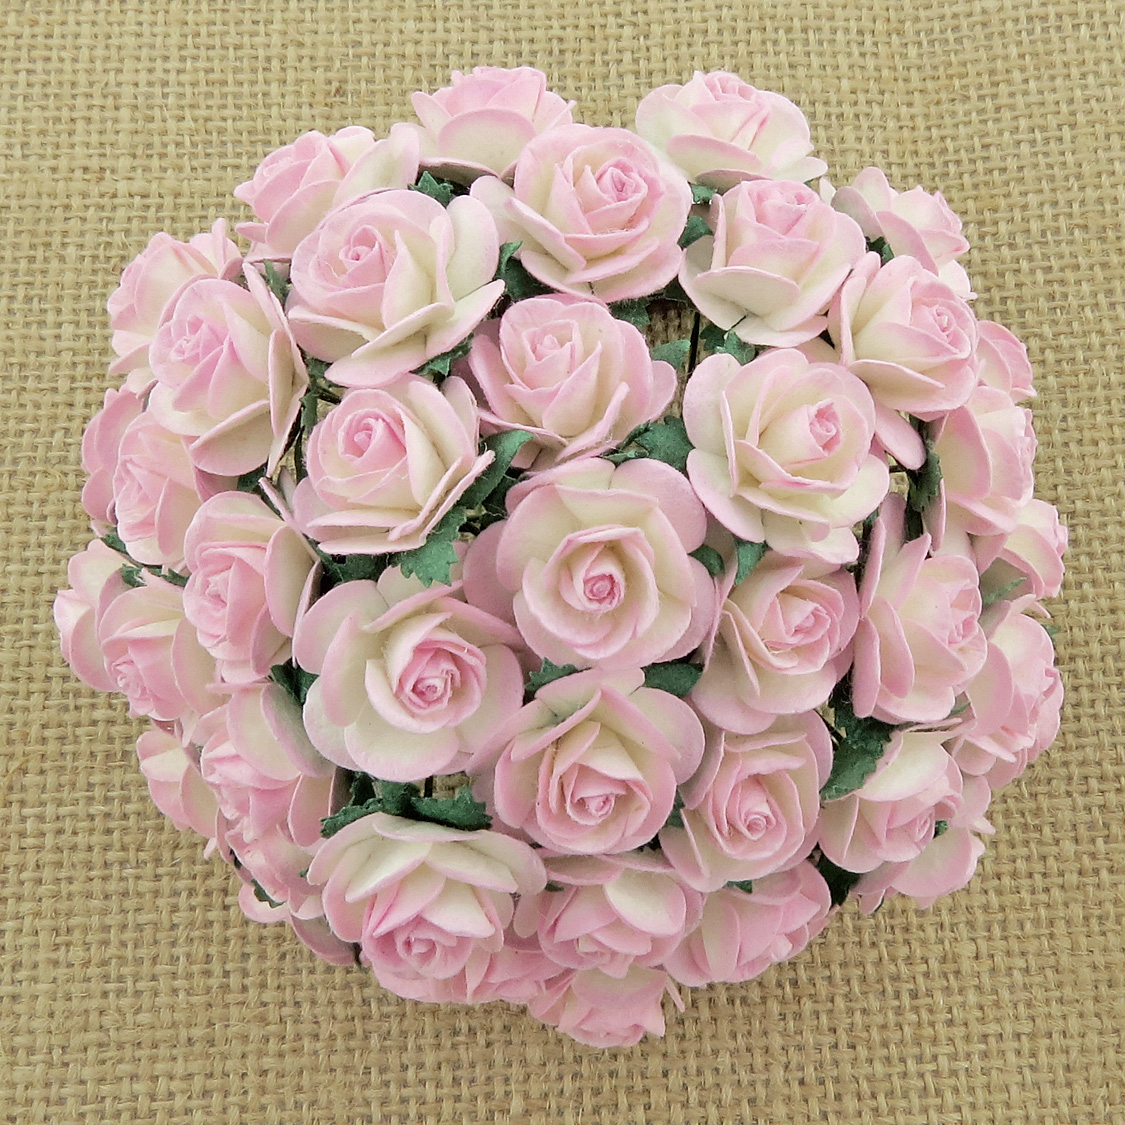 100 2-TONE BABY PINK/IVORY MULBERRY PAPER OPEN ROSES